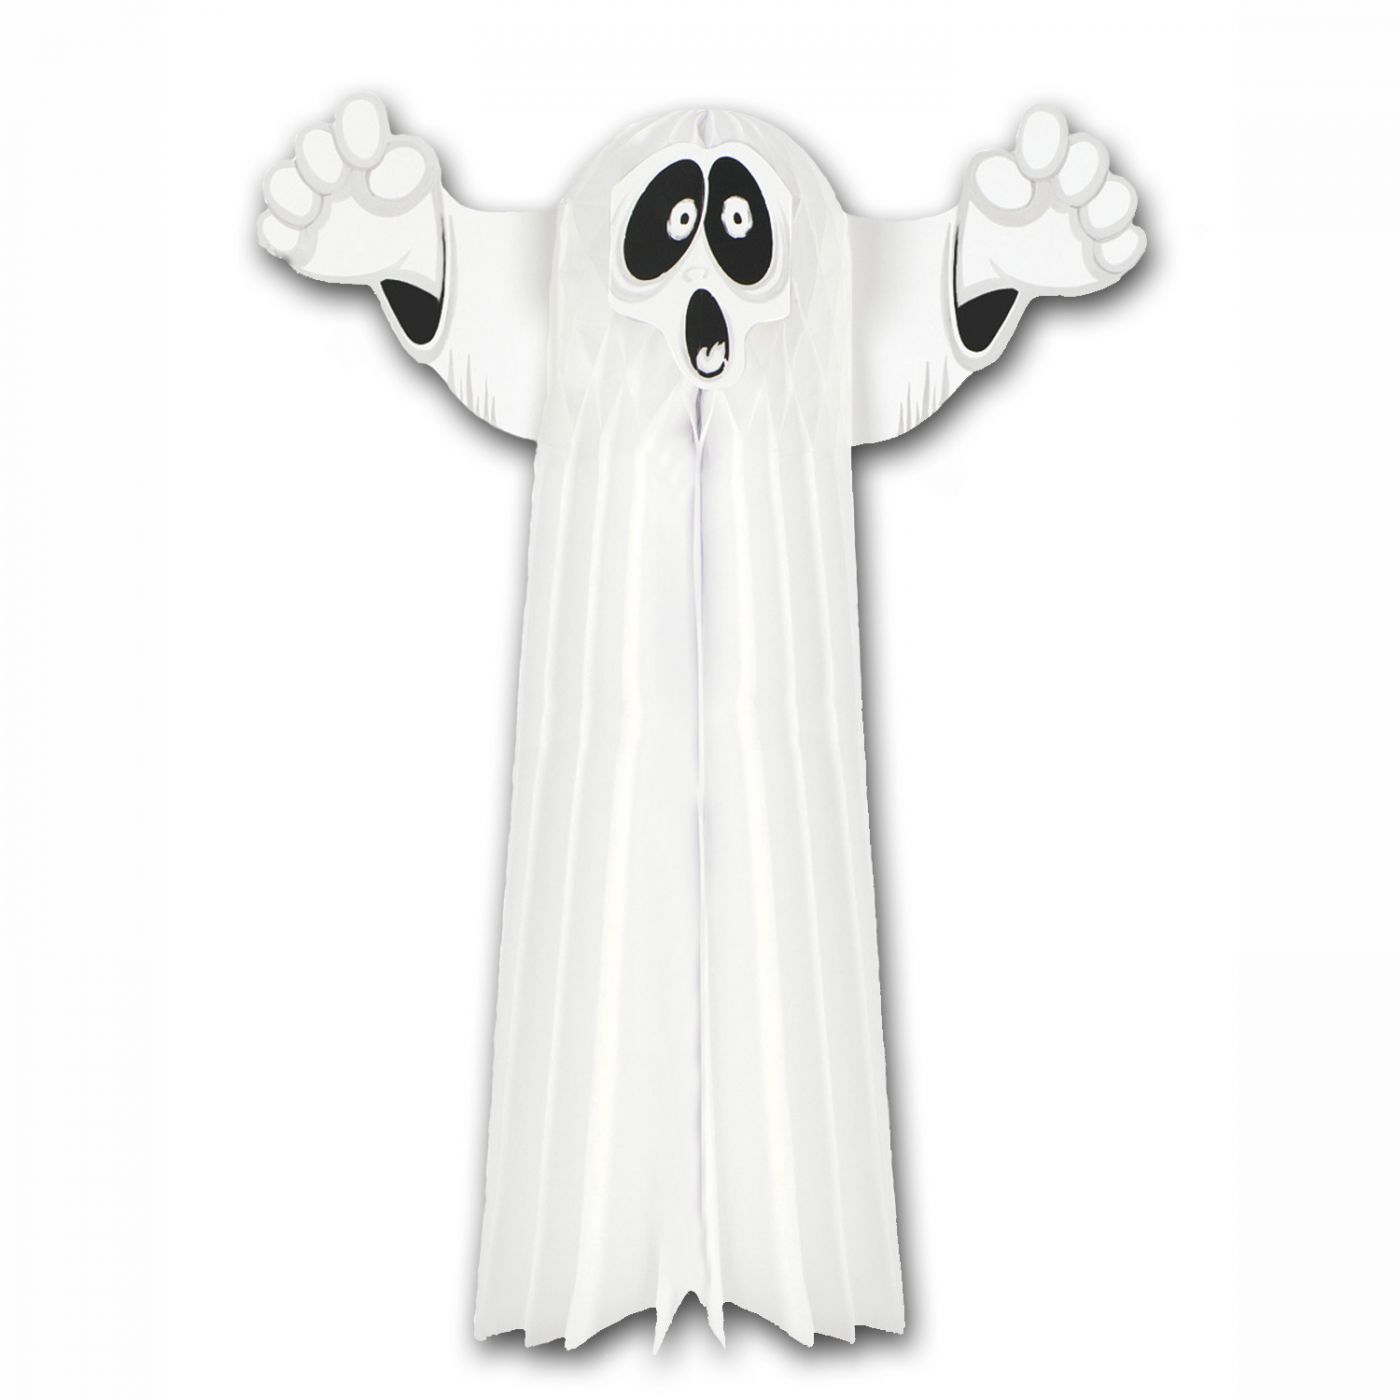 Tissue Hanging Ghost (12) image